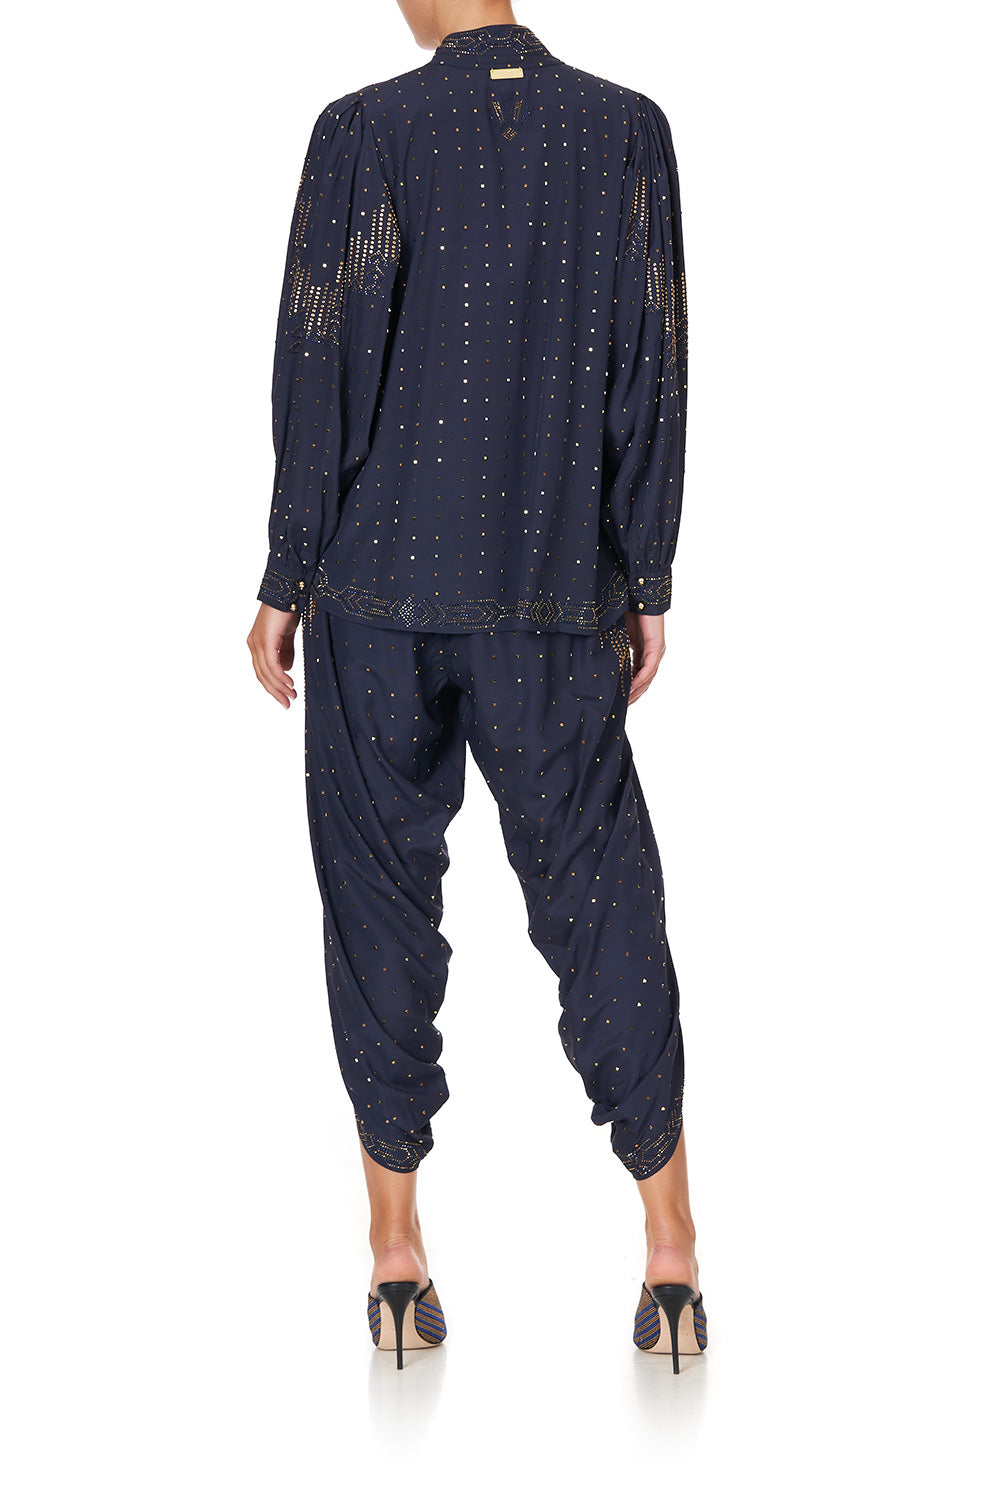 GATHERED WRAP FRONT TROUSER LUXE NAVY